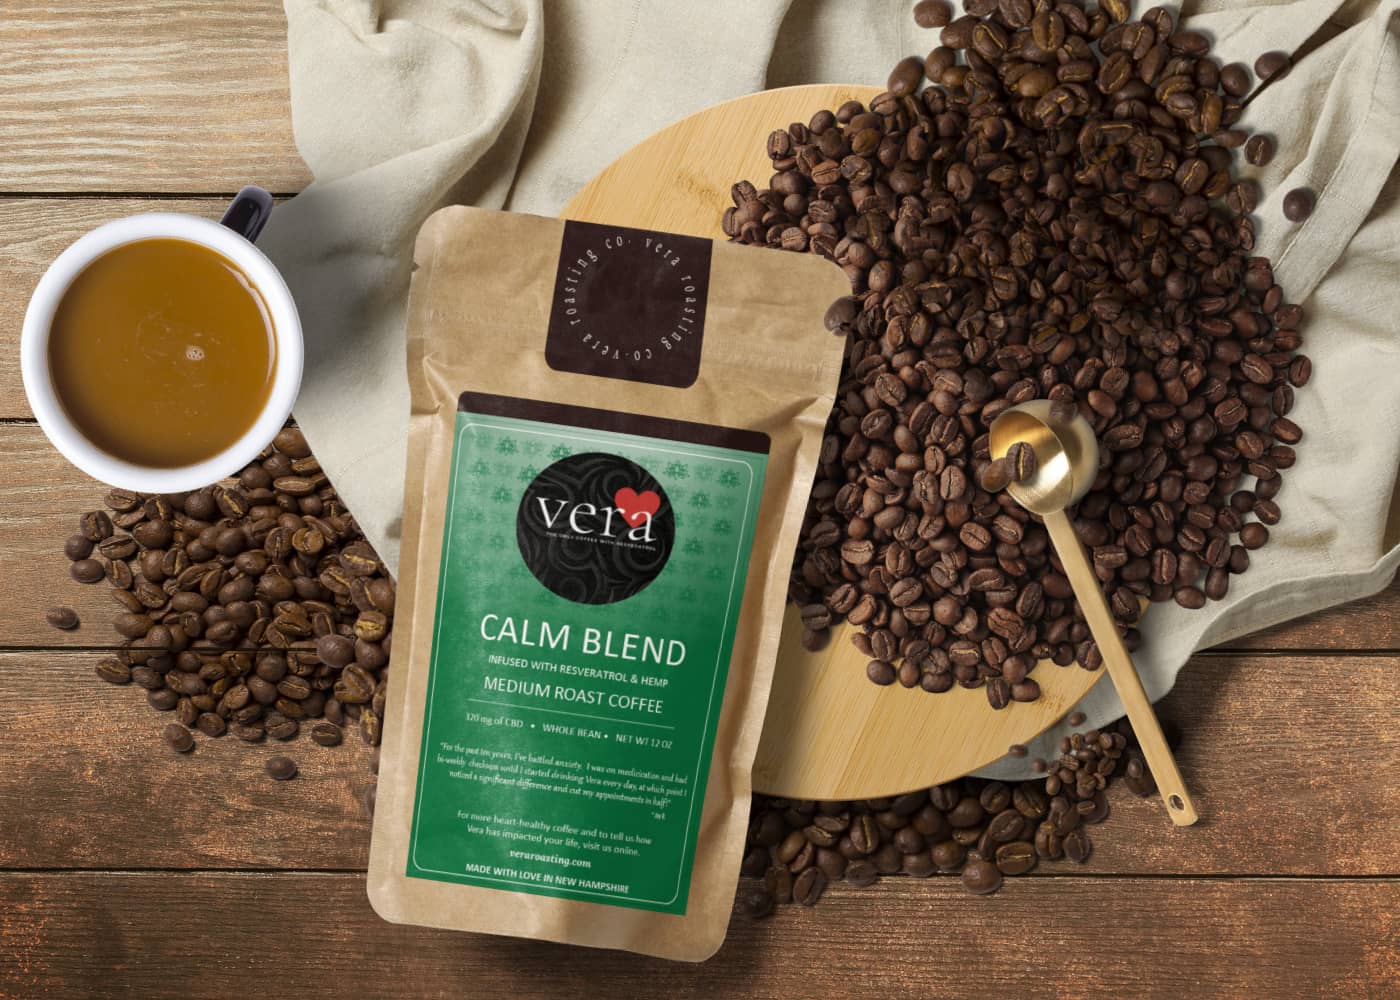 By adhering to the principles of authenticity, innovation, and honesty, our mission is to become the world's leading resveratrol coffee roaster and producer of premium coffee products that support heart health.